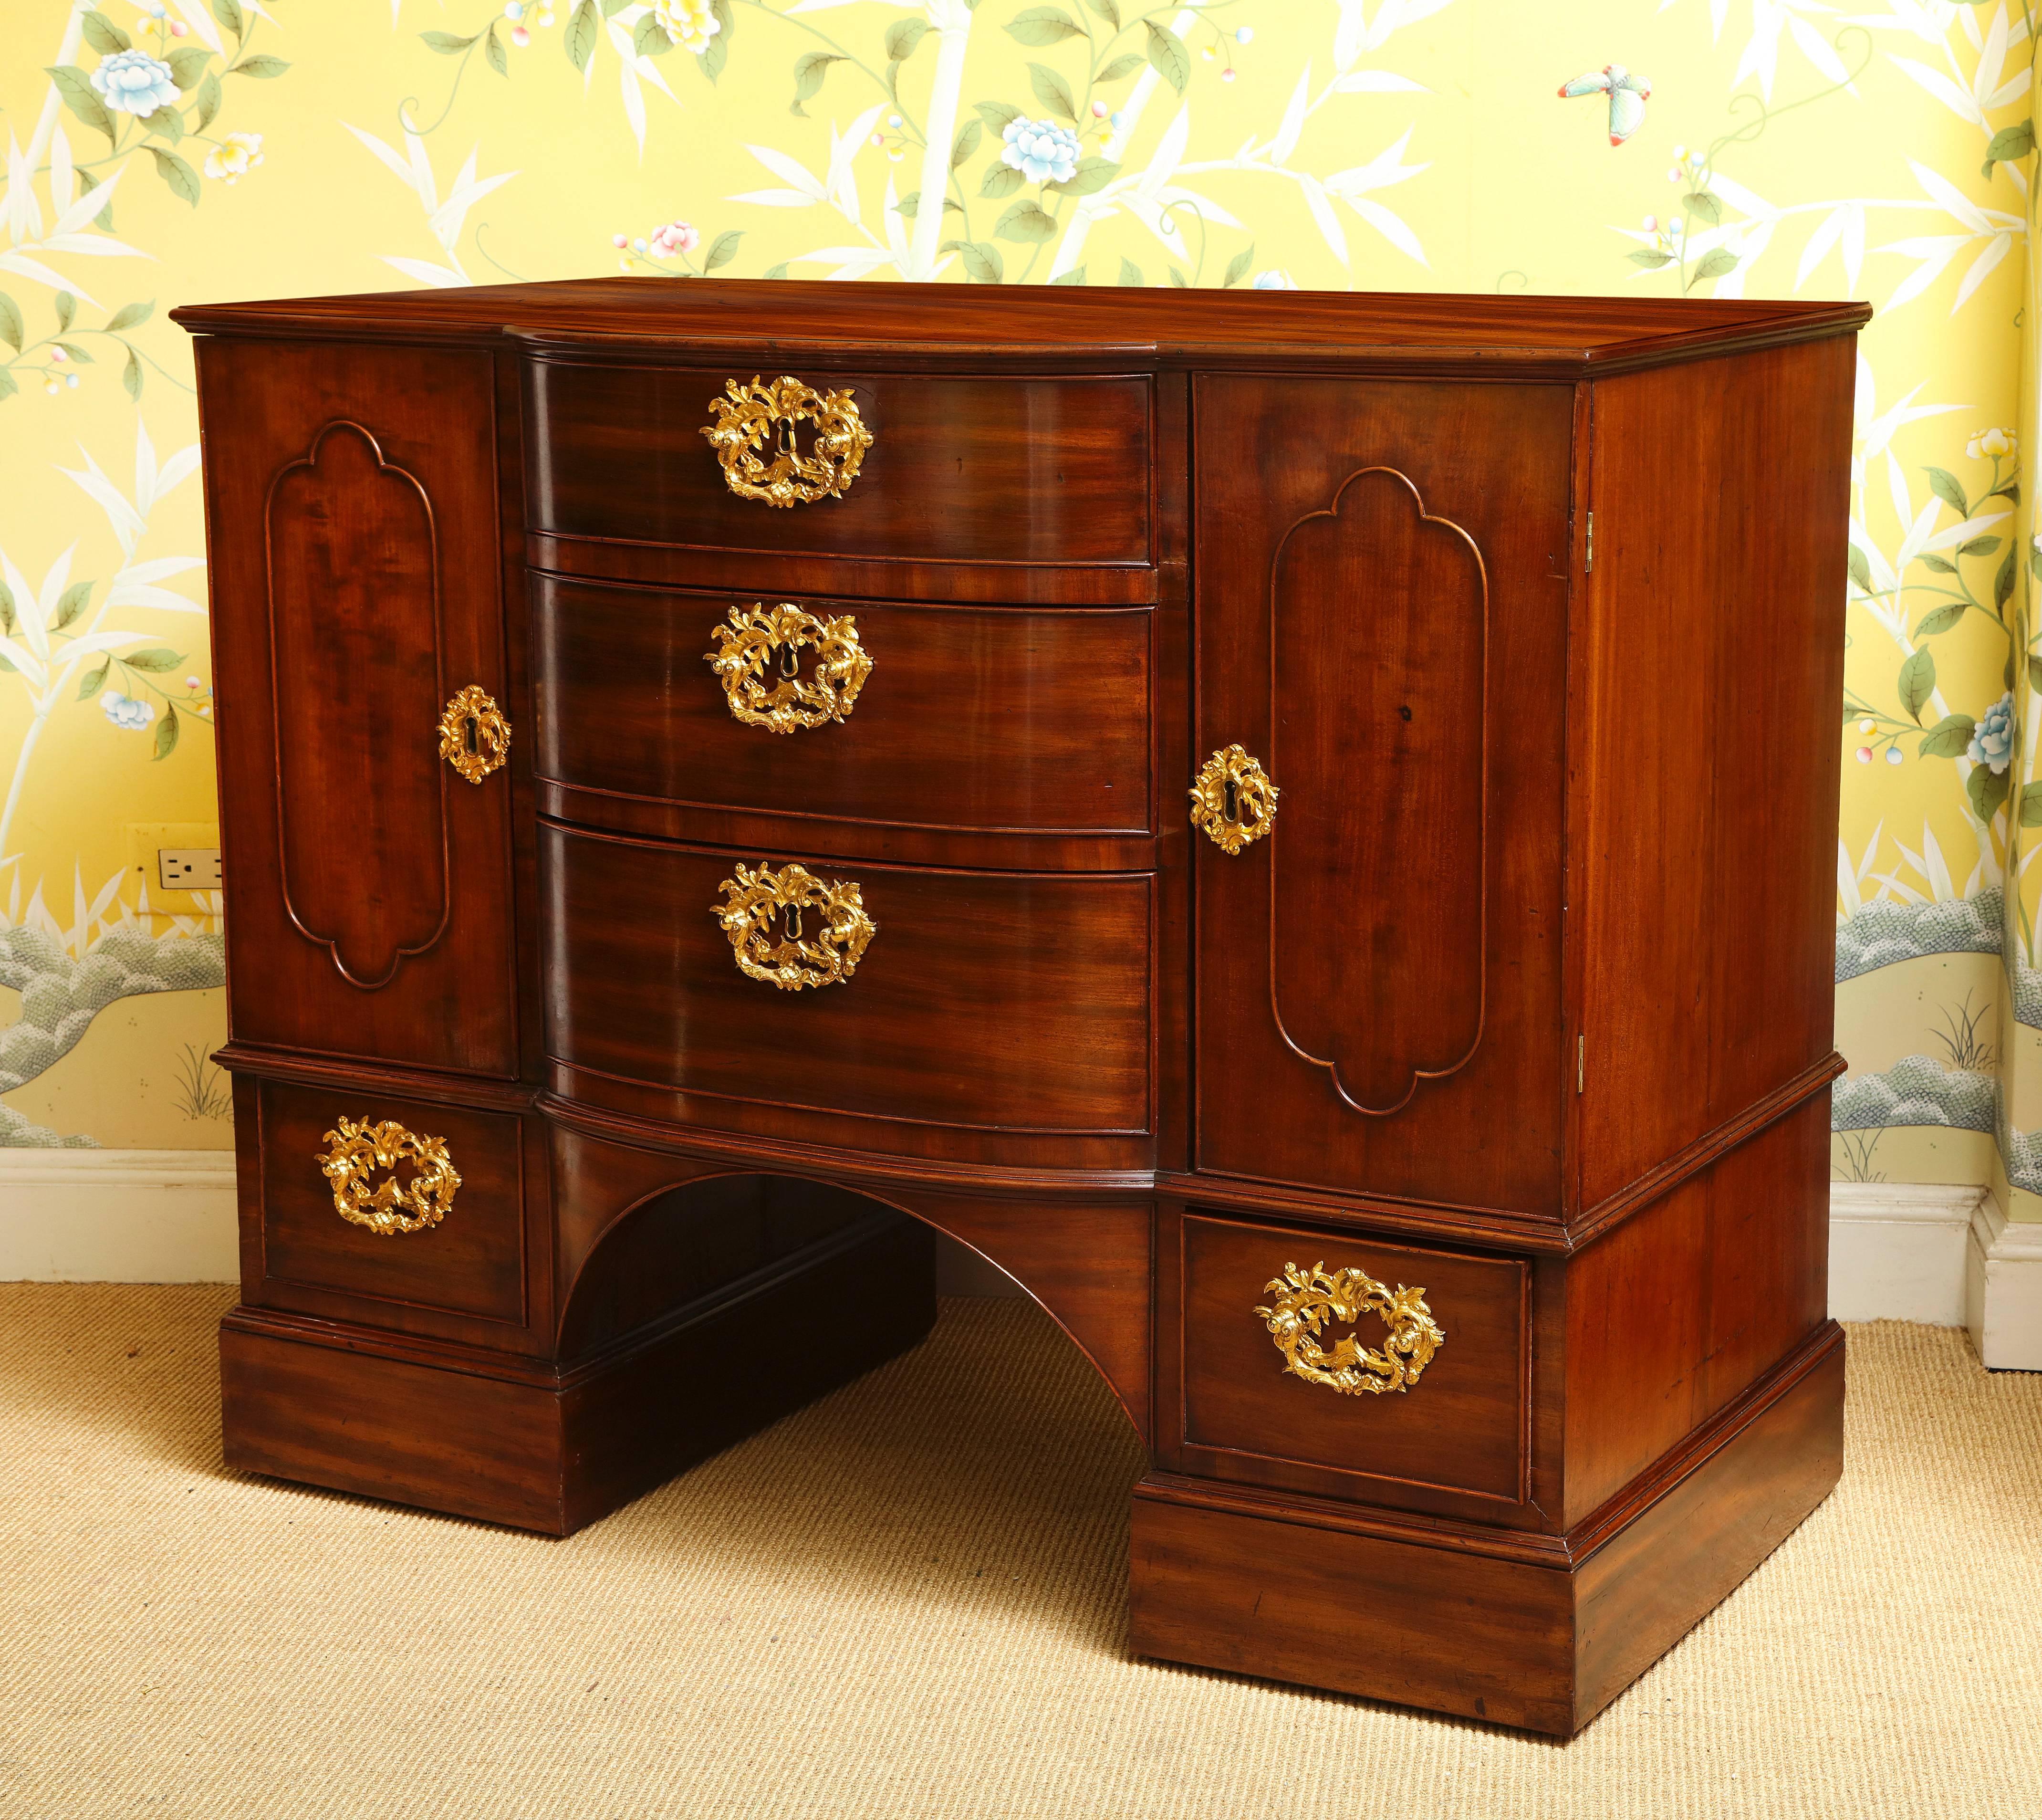 Very fine George III ormolu-mounted mahogany commode, having a moulded rectangular bowed center above three graduated cockbeaded drawers above the arched center and flanked on either side by a shaped paneled door and short drawer mounted with gilt